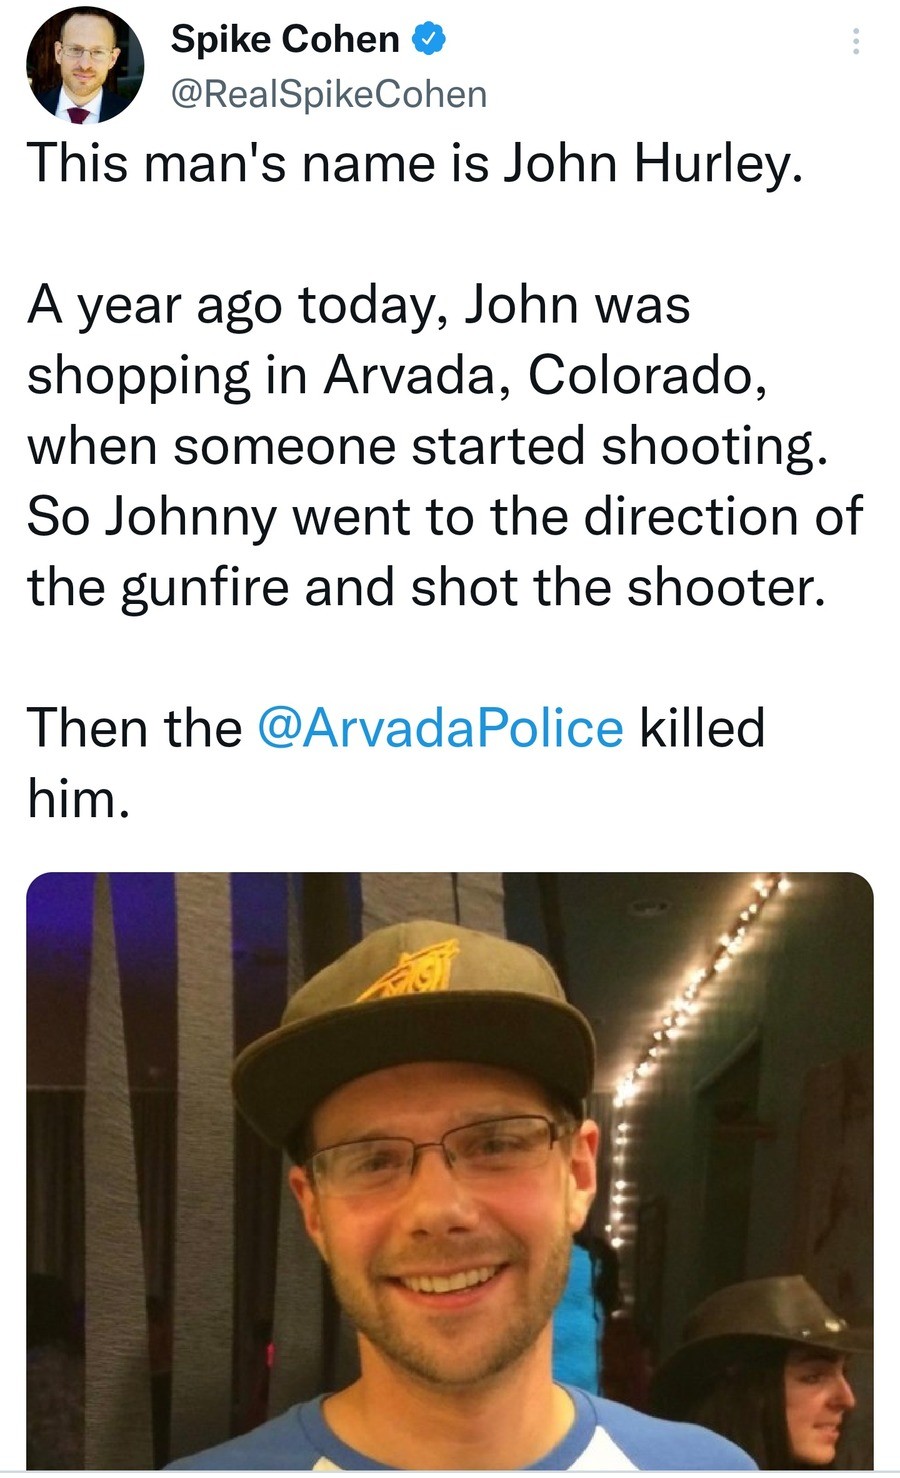 retiring Hyena. That is a way to apply &quot; No good deed goes unpunished&quot;.. This reminds me of the time a muslim shooter killed 10 white people in Boulder two years ago and still hasn't gone to trial